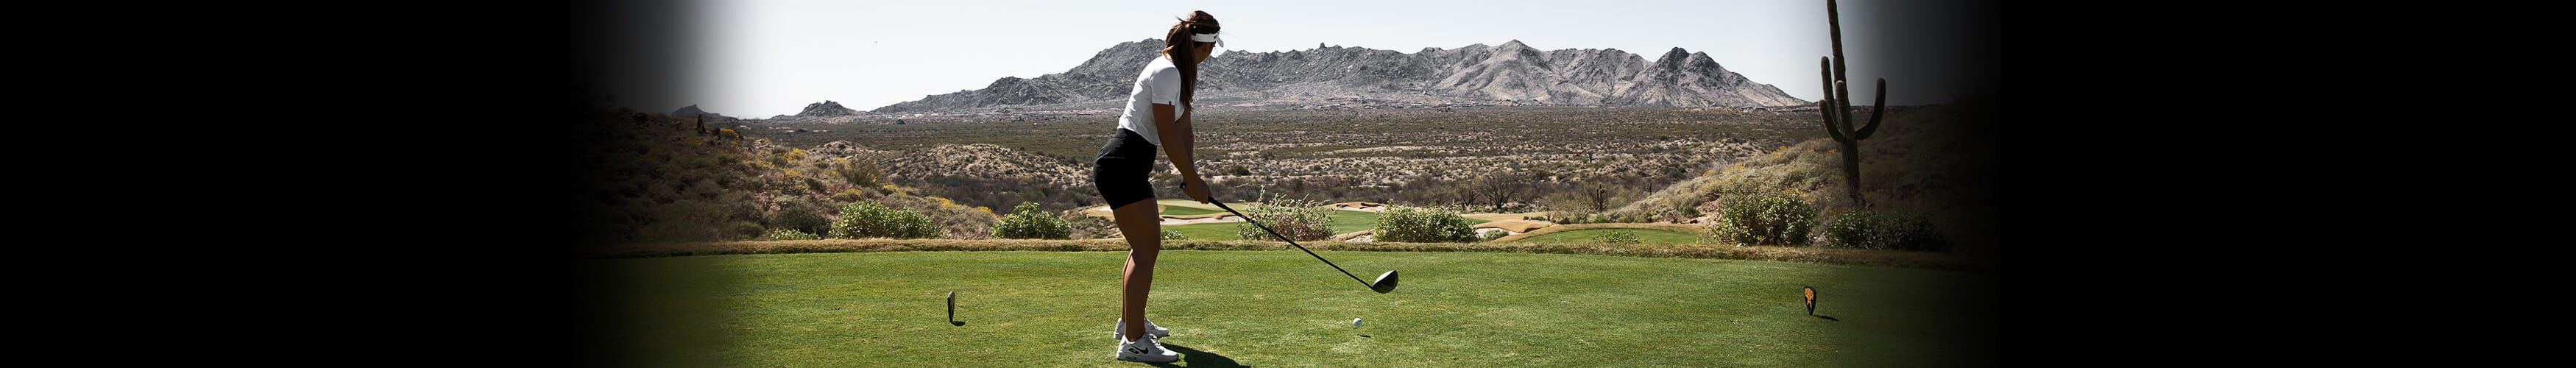 Women golfer setting up to hit a drive